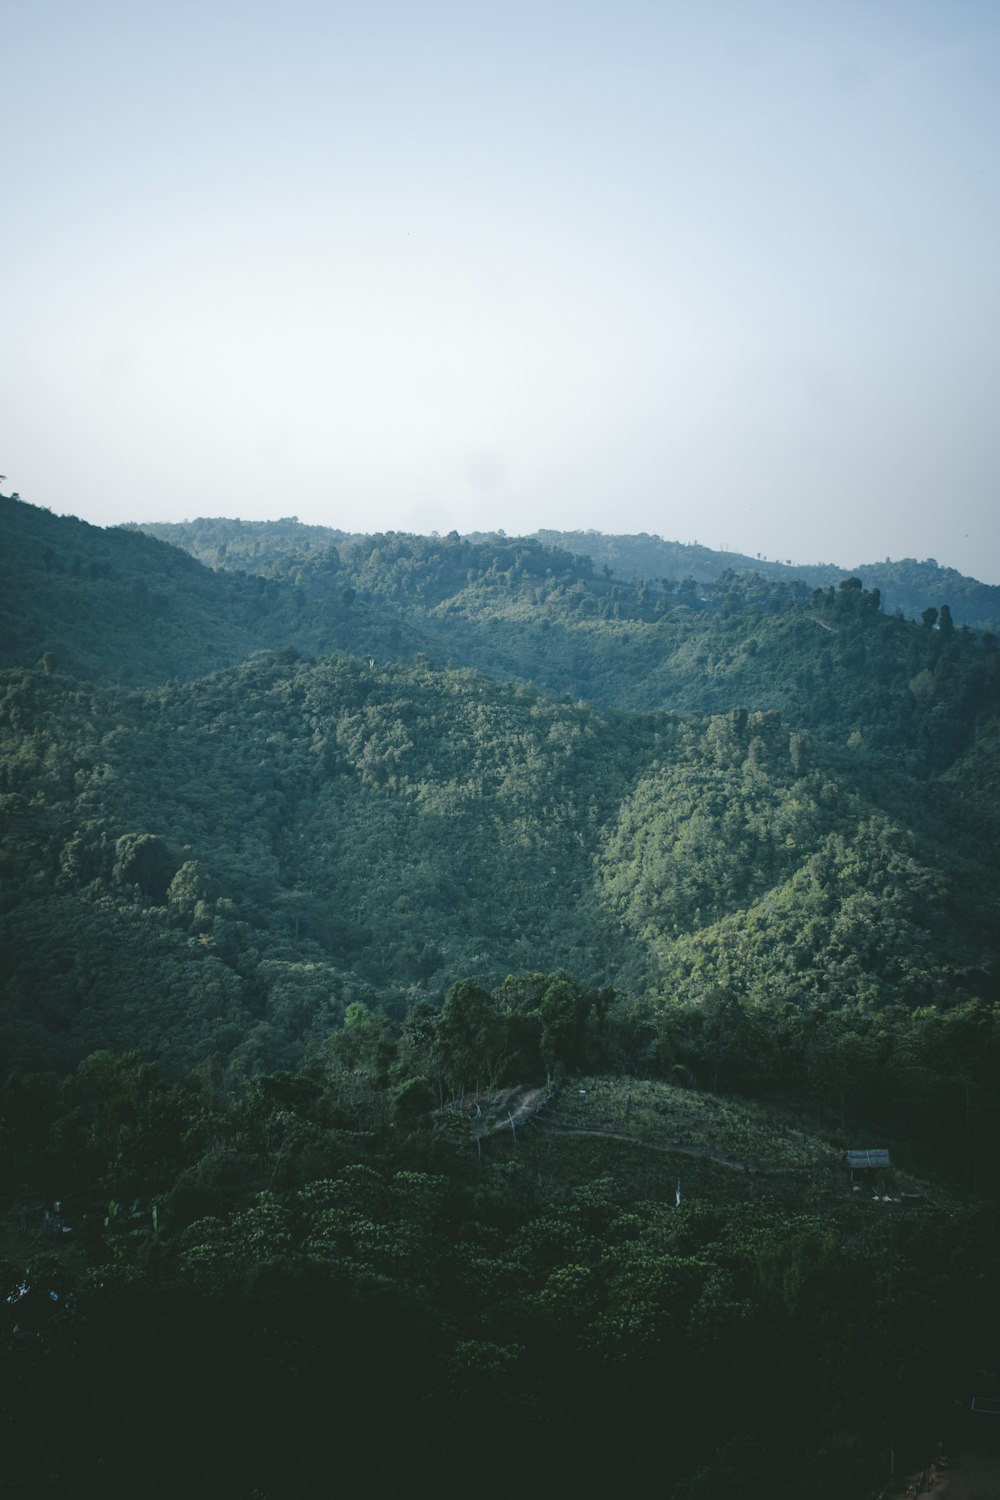 a view of a lush green hillside covered in trees